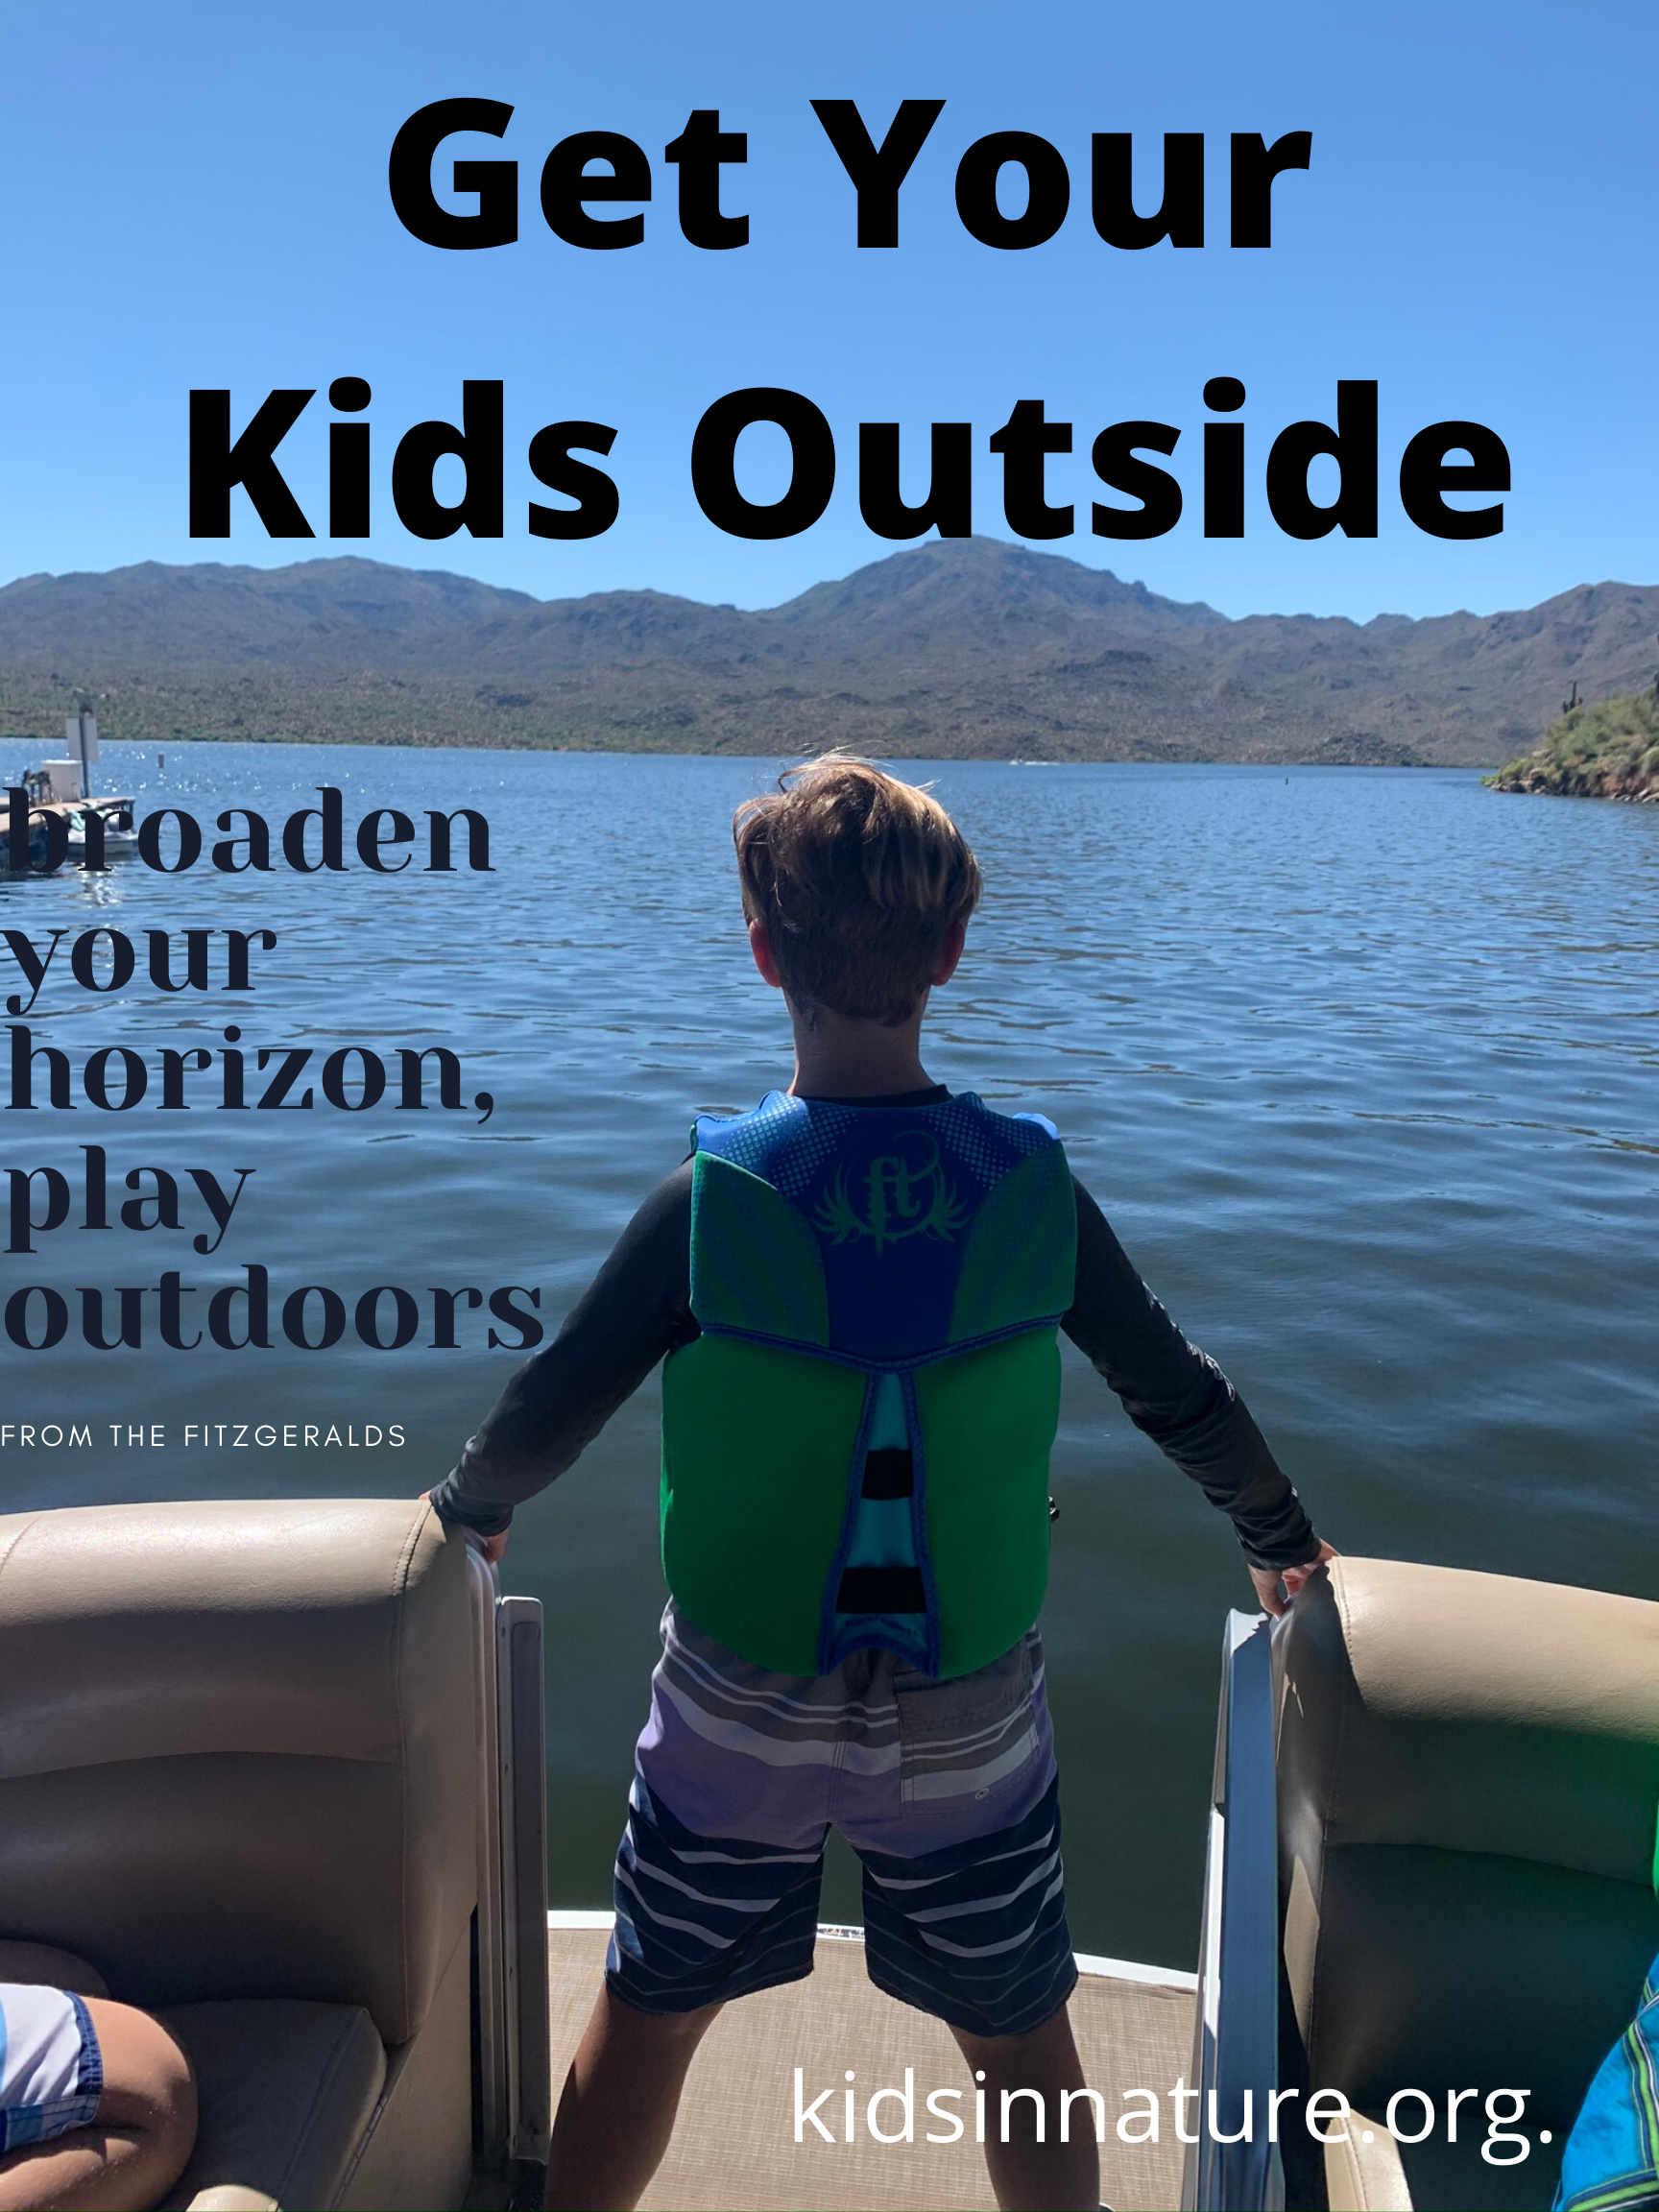 Get Your Kids Outdoors